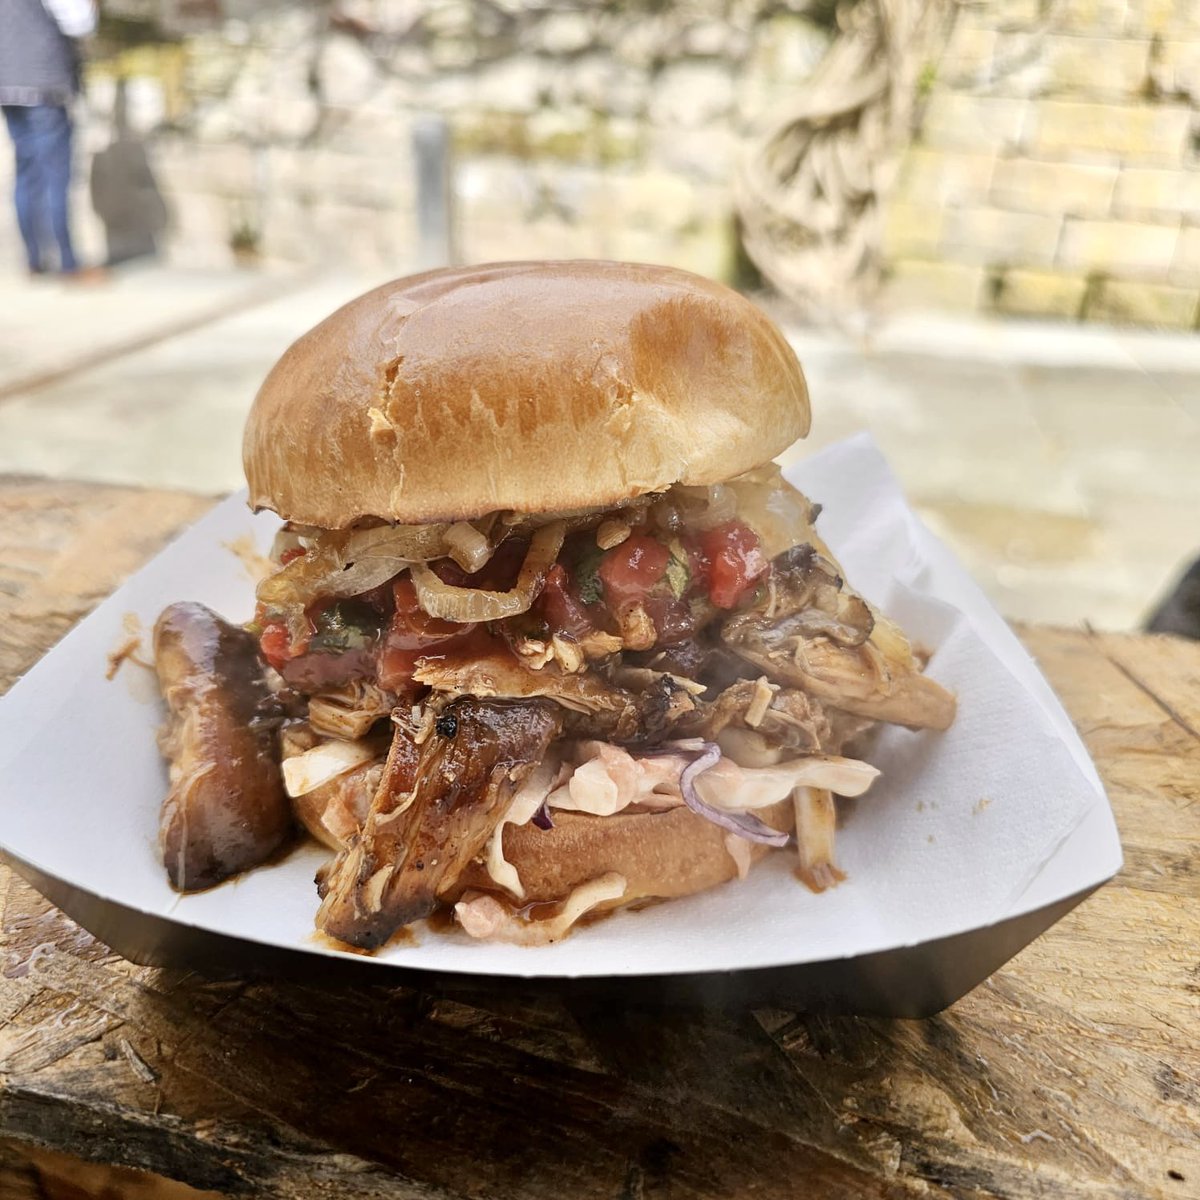 Who’s looking forward to a Jerk chicken butty for lunch today from @thelittlekitchen05 😋

#castlefieldestates #foodtrucks #lunchtime #castlefield #manchesteroffices #jerkchicken #manchester #opentothepublic